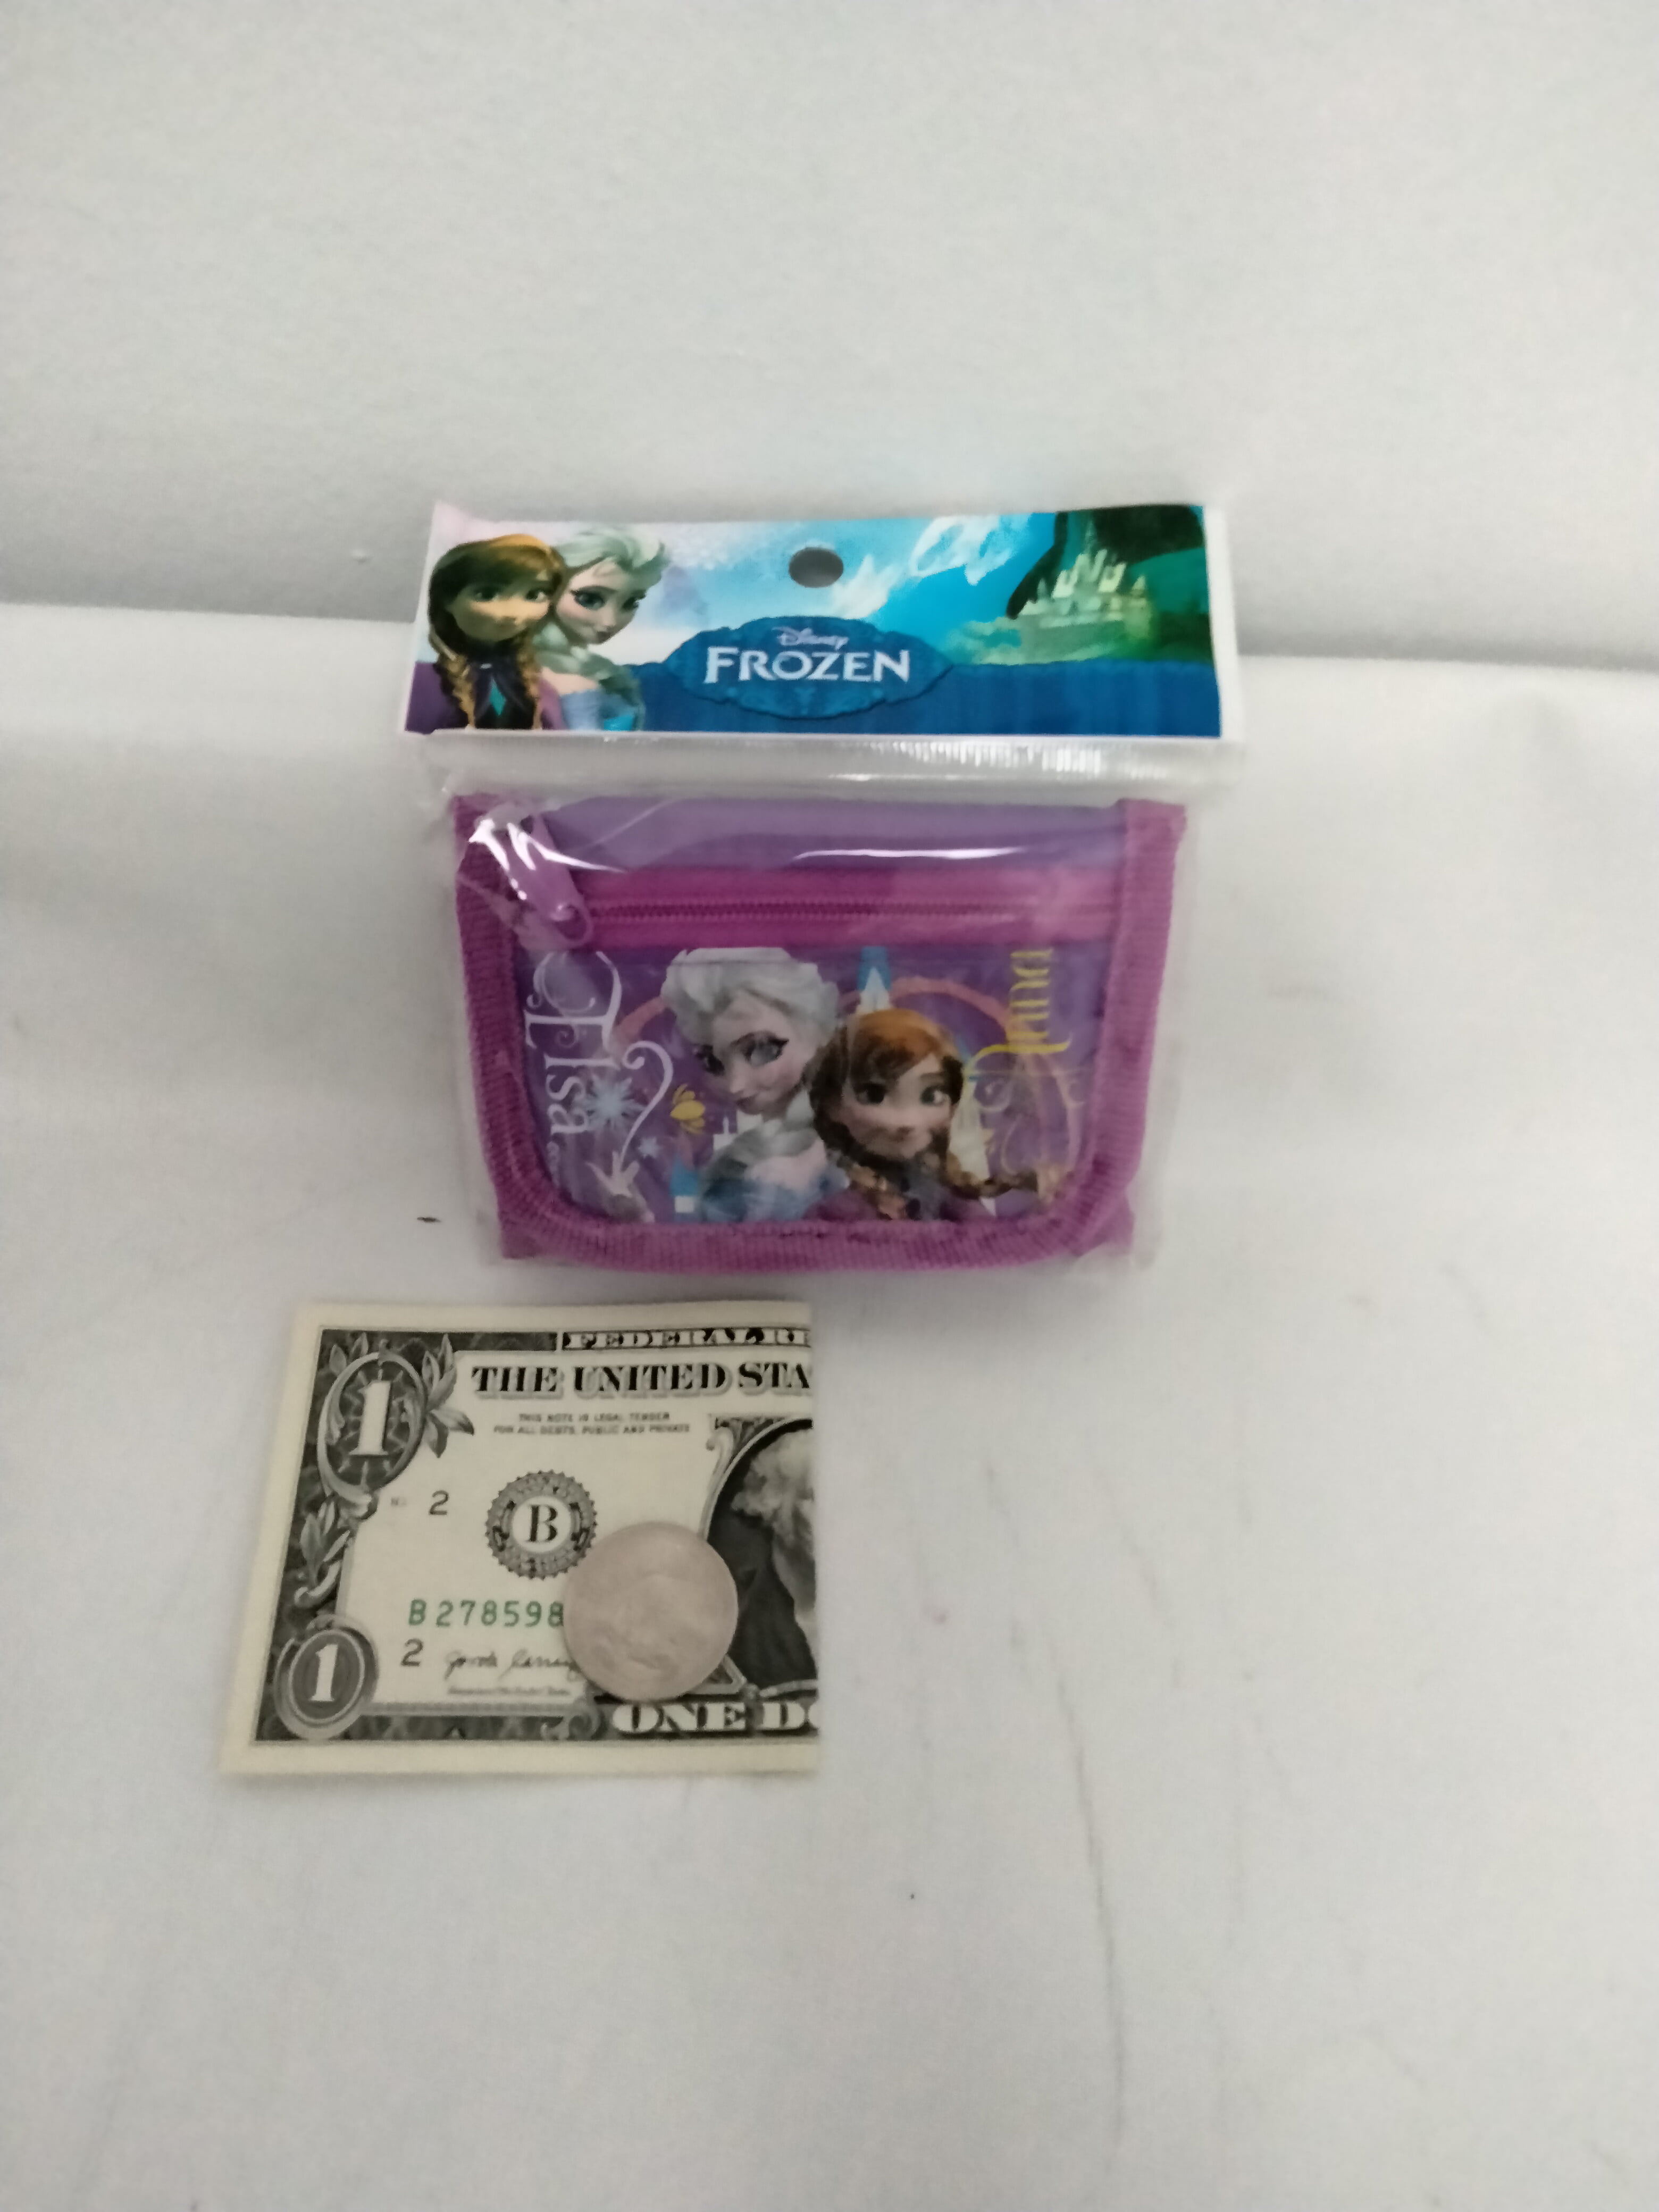 NEW FROZEN ELSA ANNA OLAF SMALL STORAGE BOX WITH REMOVABLE DIVIDERS FLAT PACKED 